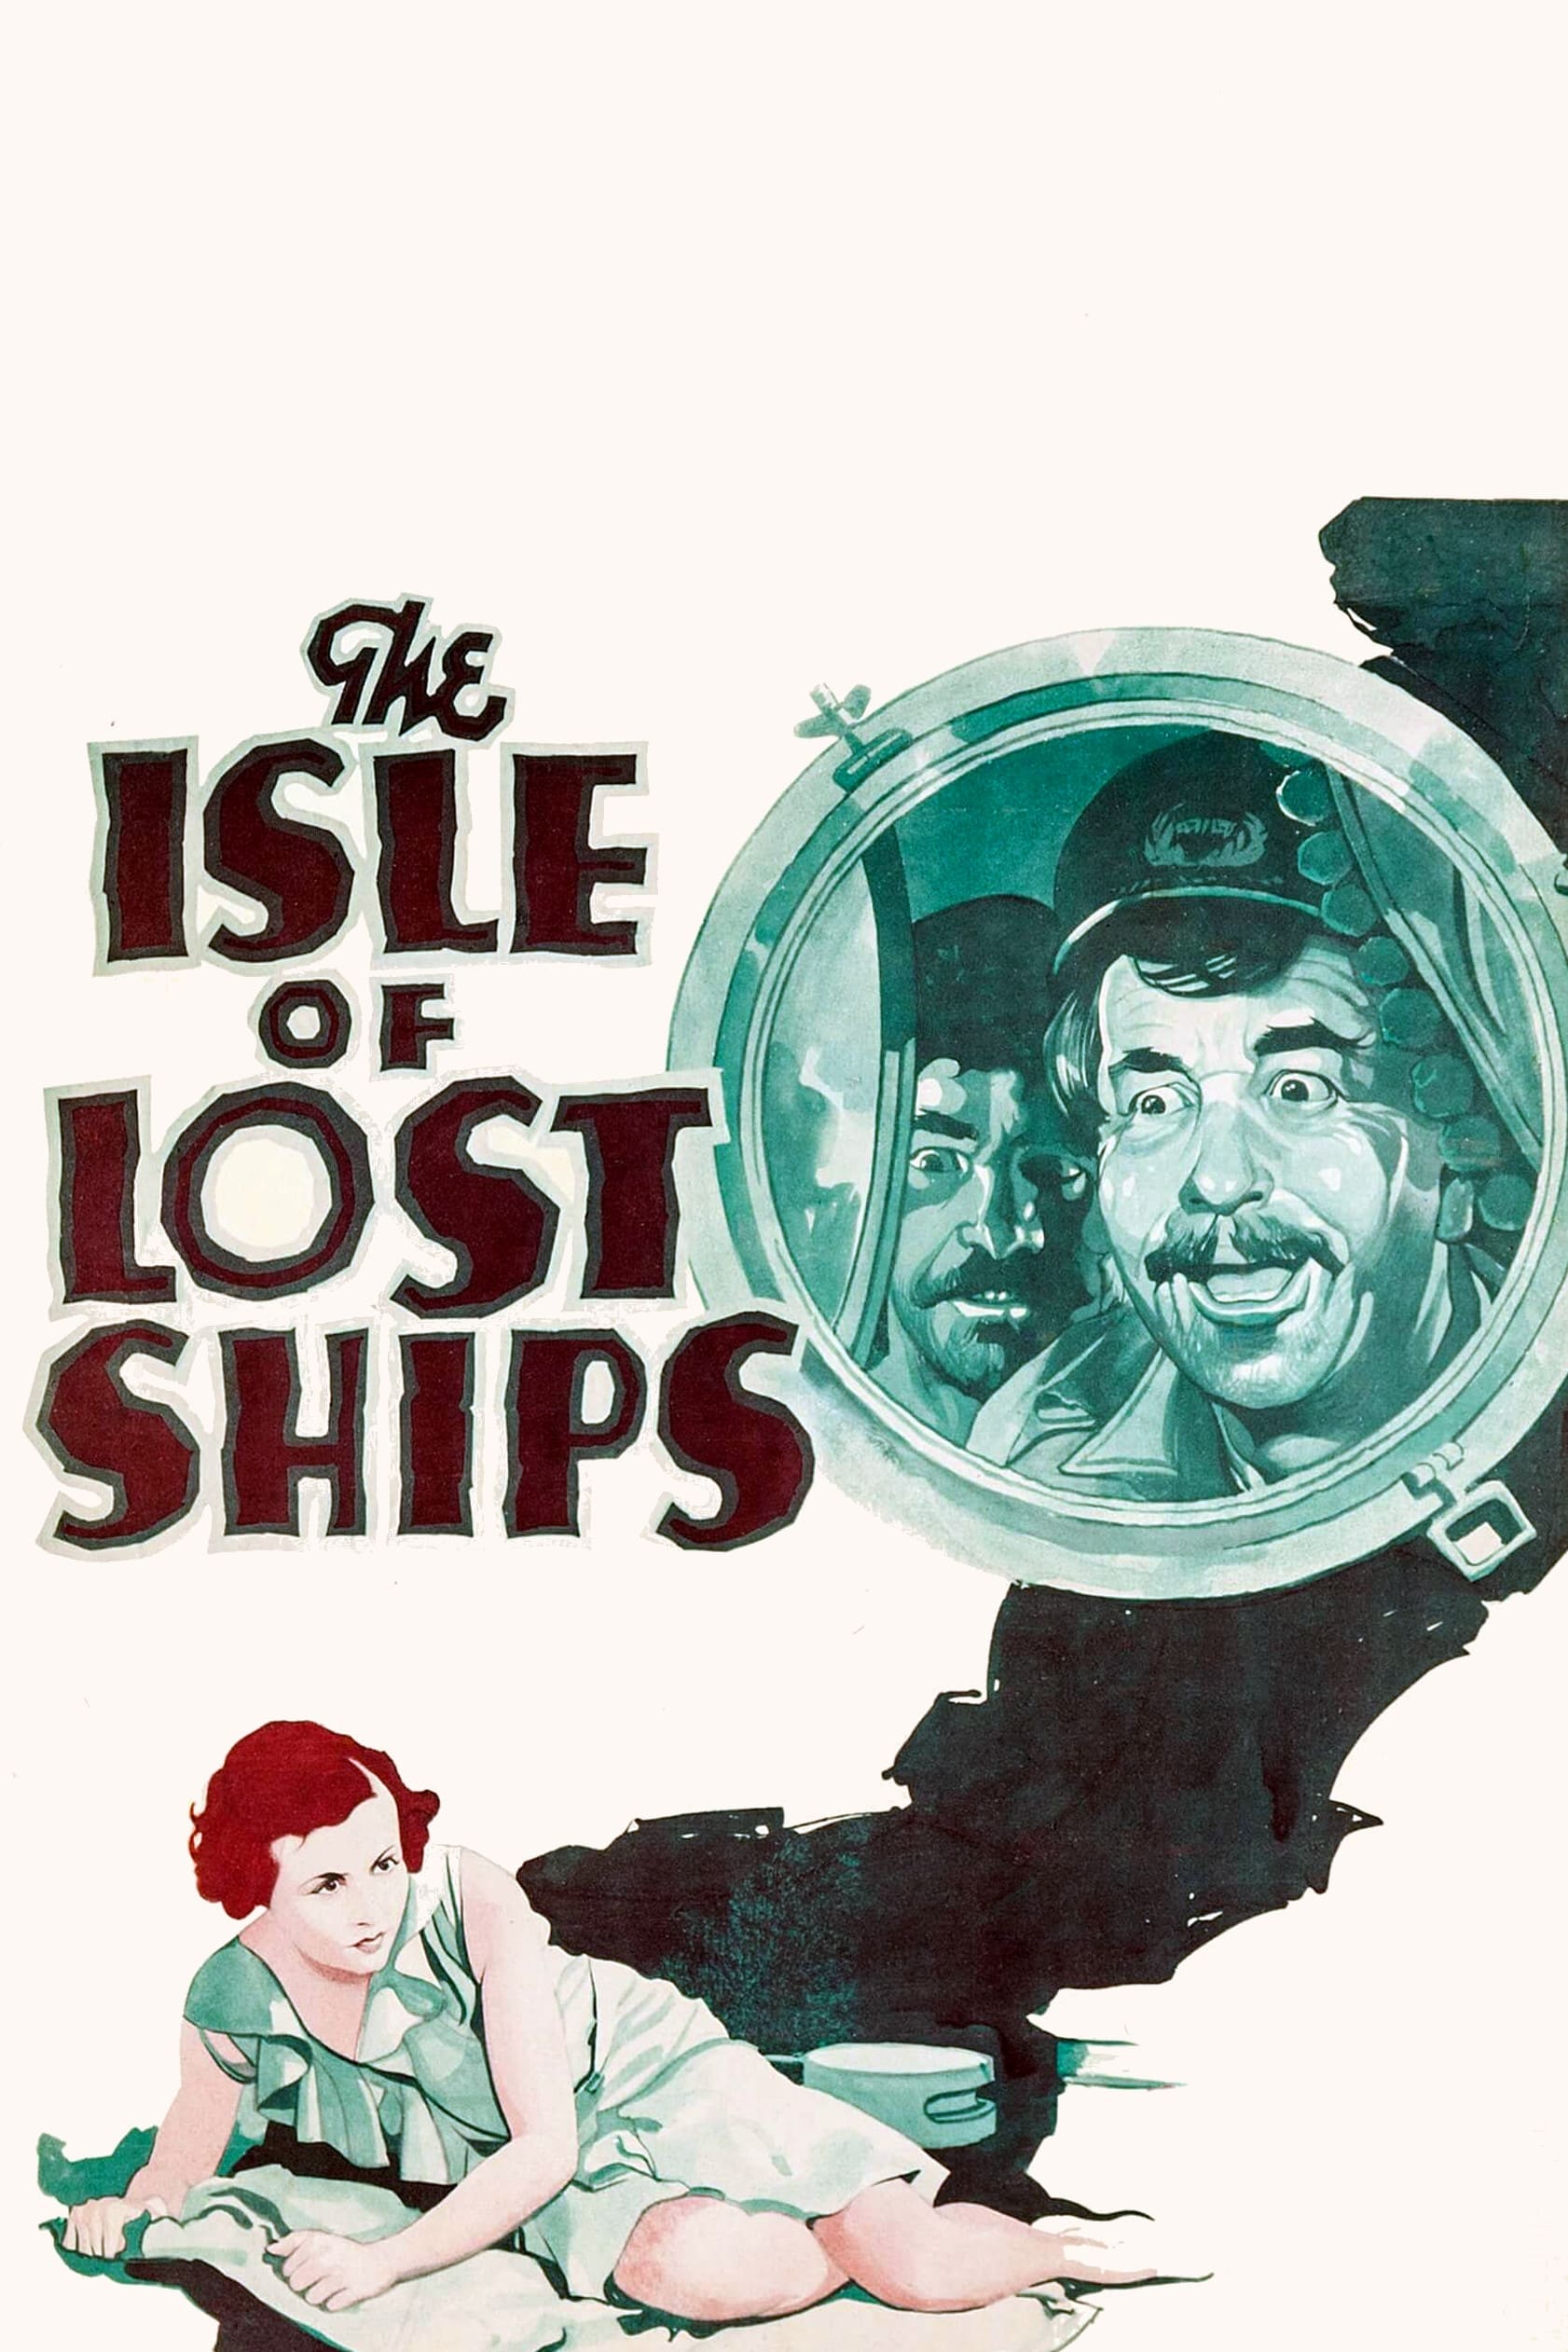 The Isle of Lost Ships